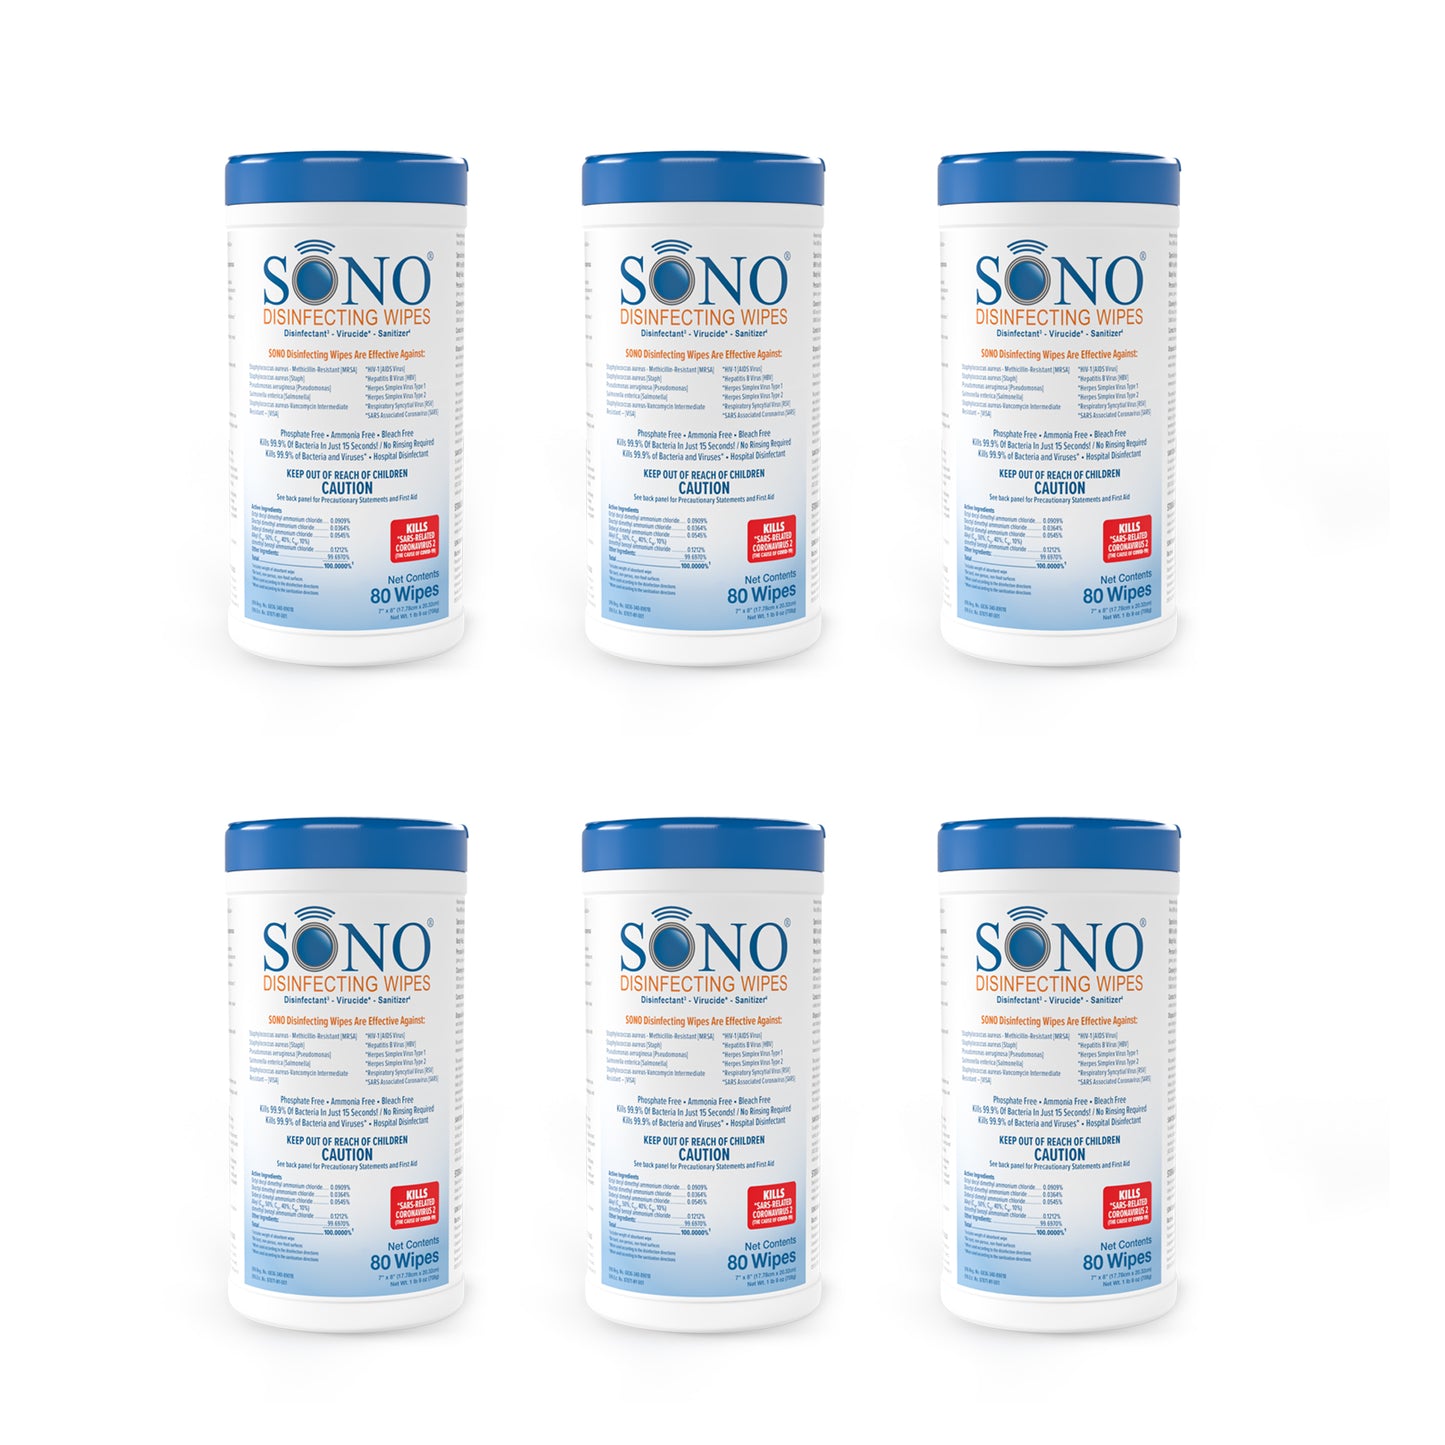 "SONO Disinfecting Wipes 6-Pack Canisters, providing 80 ct each for thorough cleaning and disinfection.